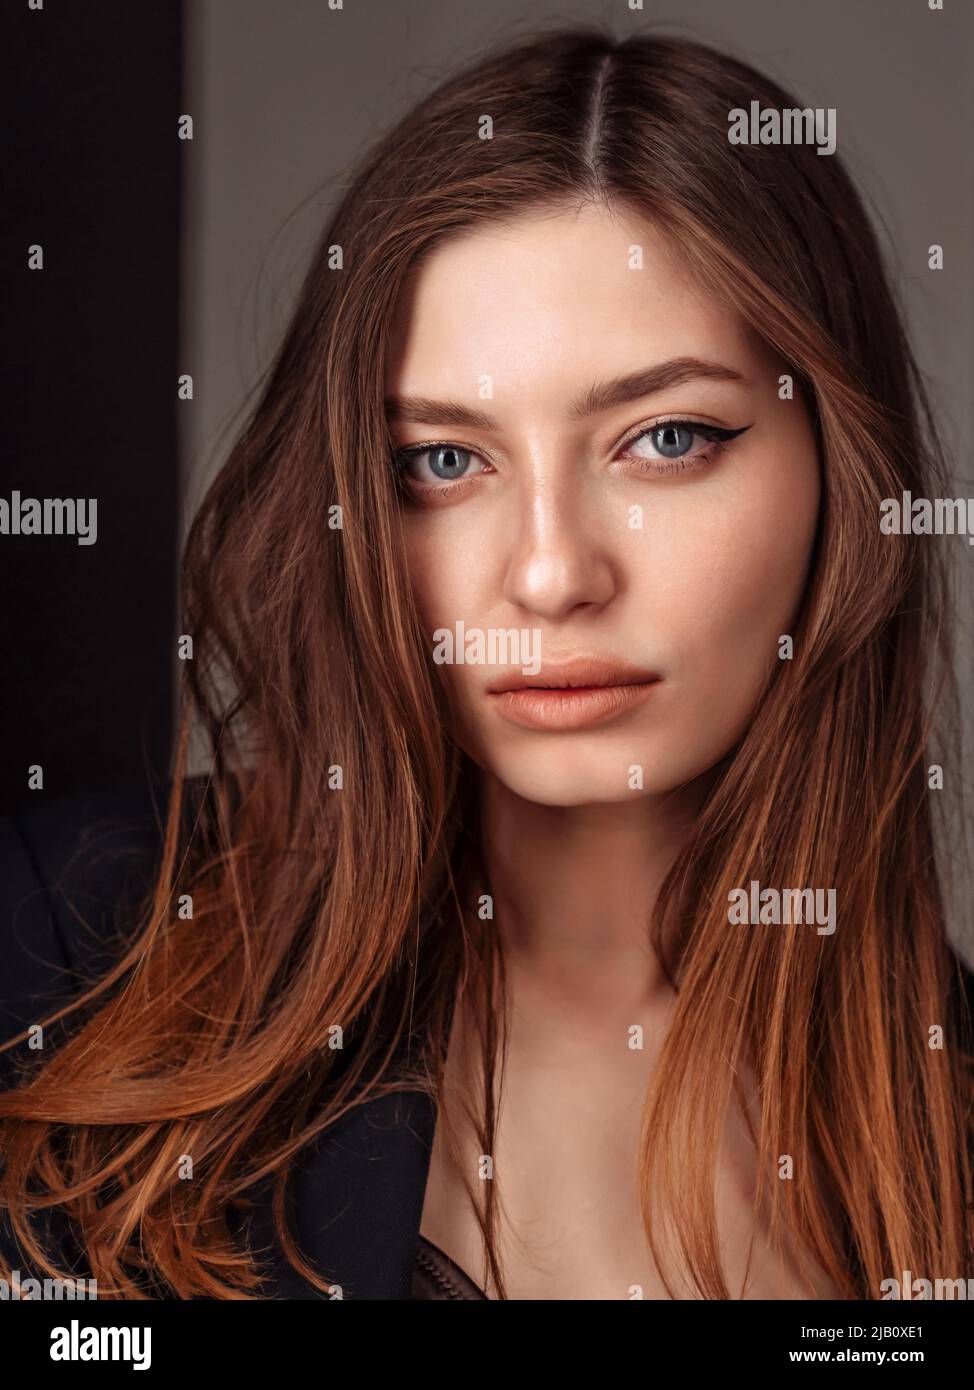 Close up portrait of joyless 20-25s woman standing alone. Face serious female with sad eyes staring at camera. vertical Stock Photo